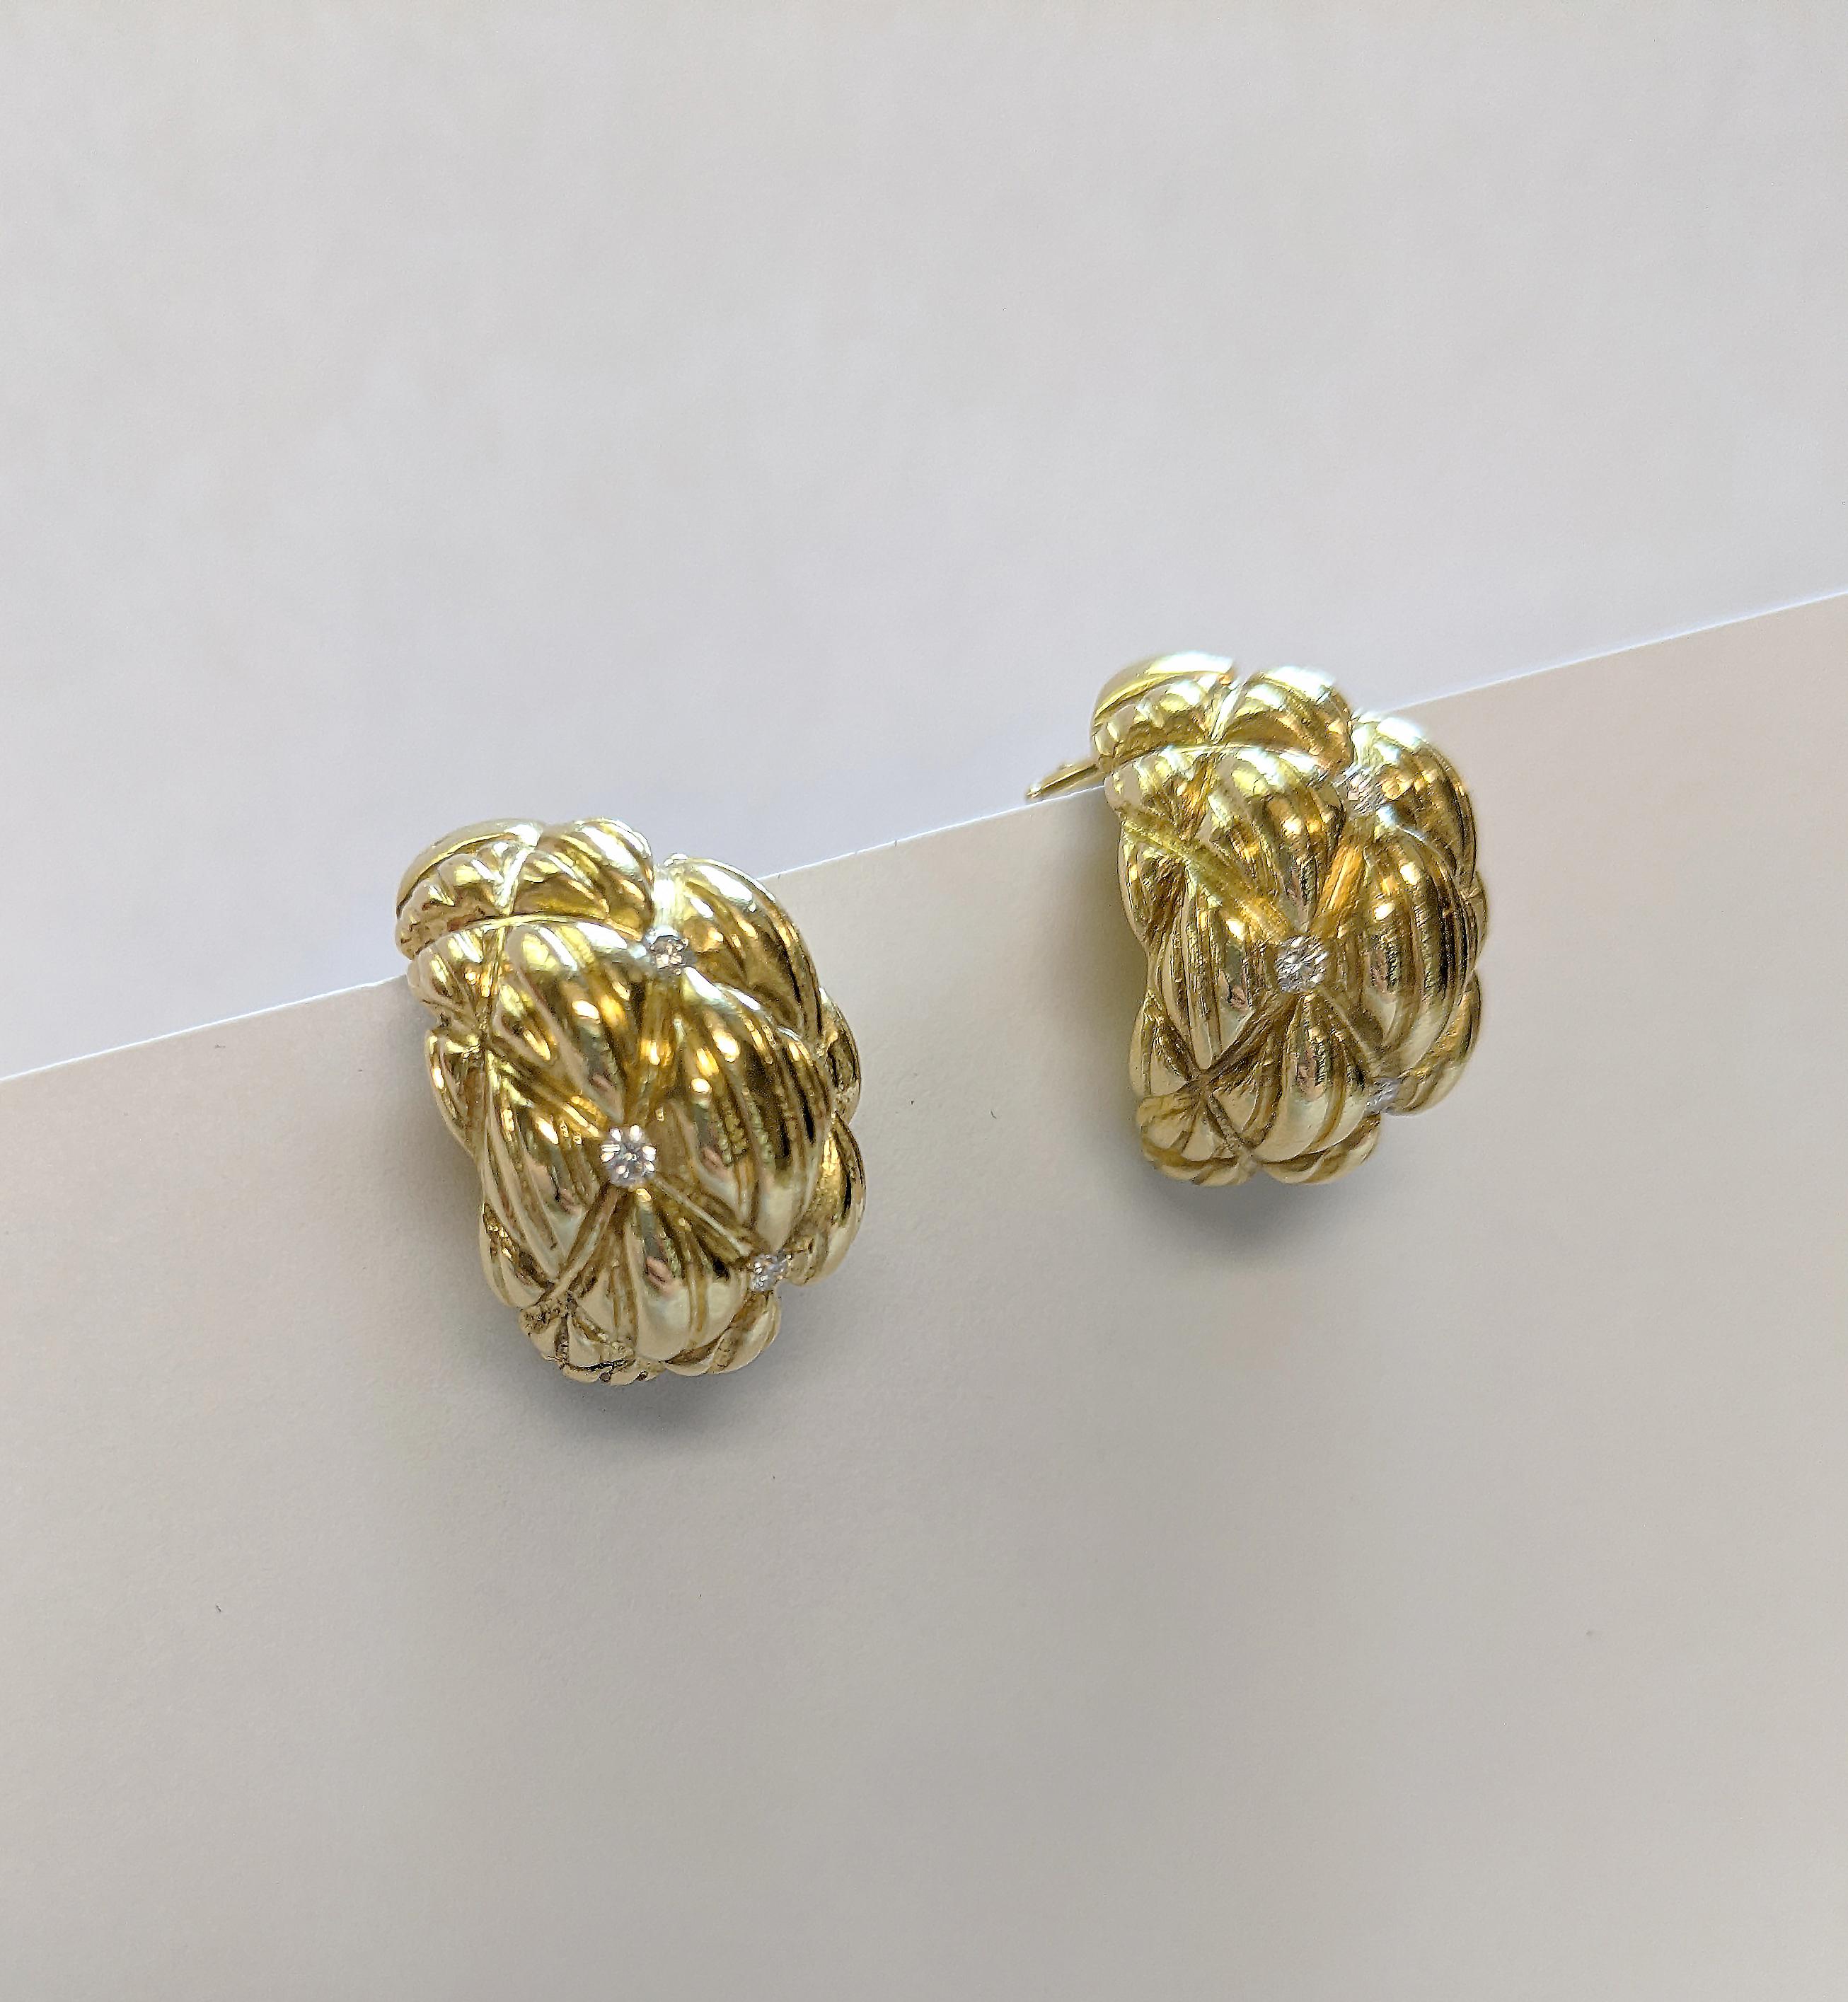 This pair of retro clip-on earrings features a tufted, textured design in the metal work that offers movement and interest. Crafted in sterling silver and topped with vibrant yellow gold plate. A quad of diamonds adorns each earring. 

The earrings